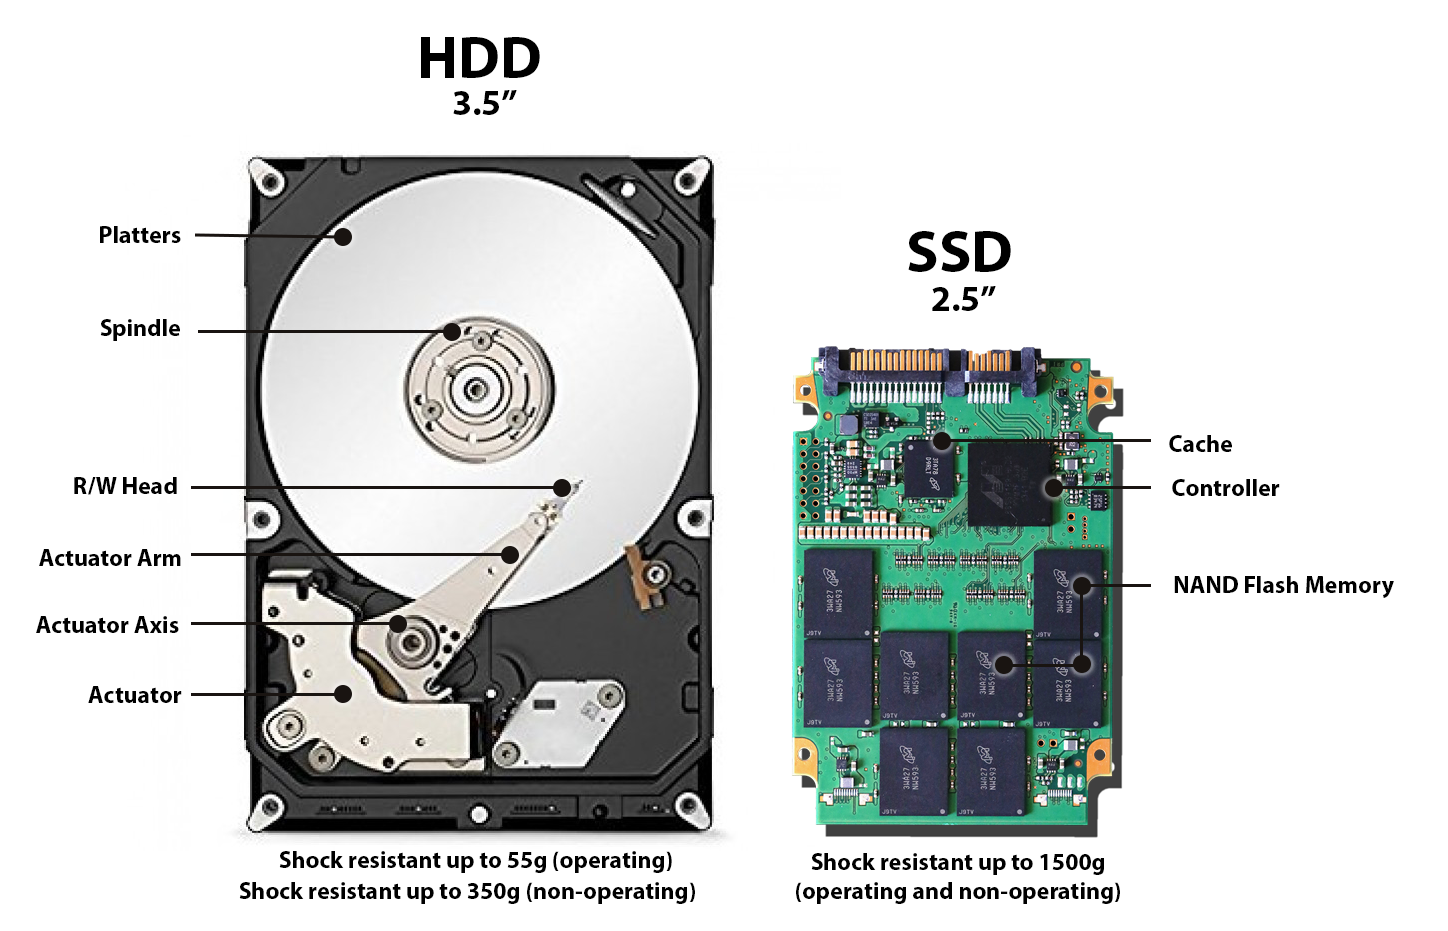 HDD vs SSD: What Does the Future for Storage Hold?